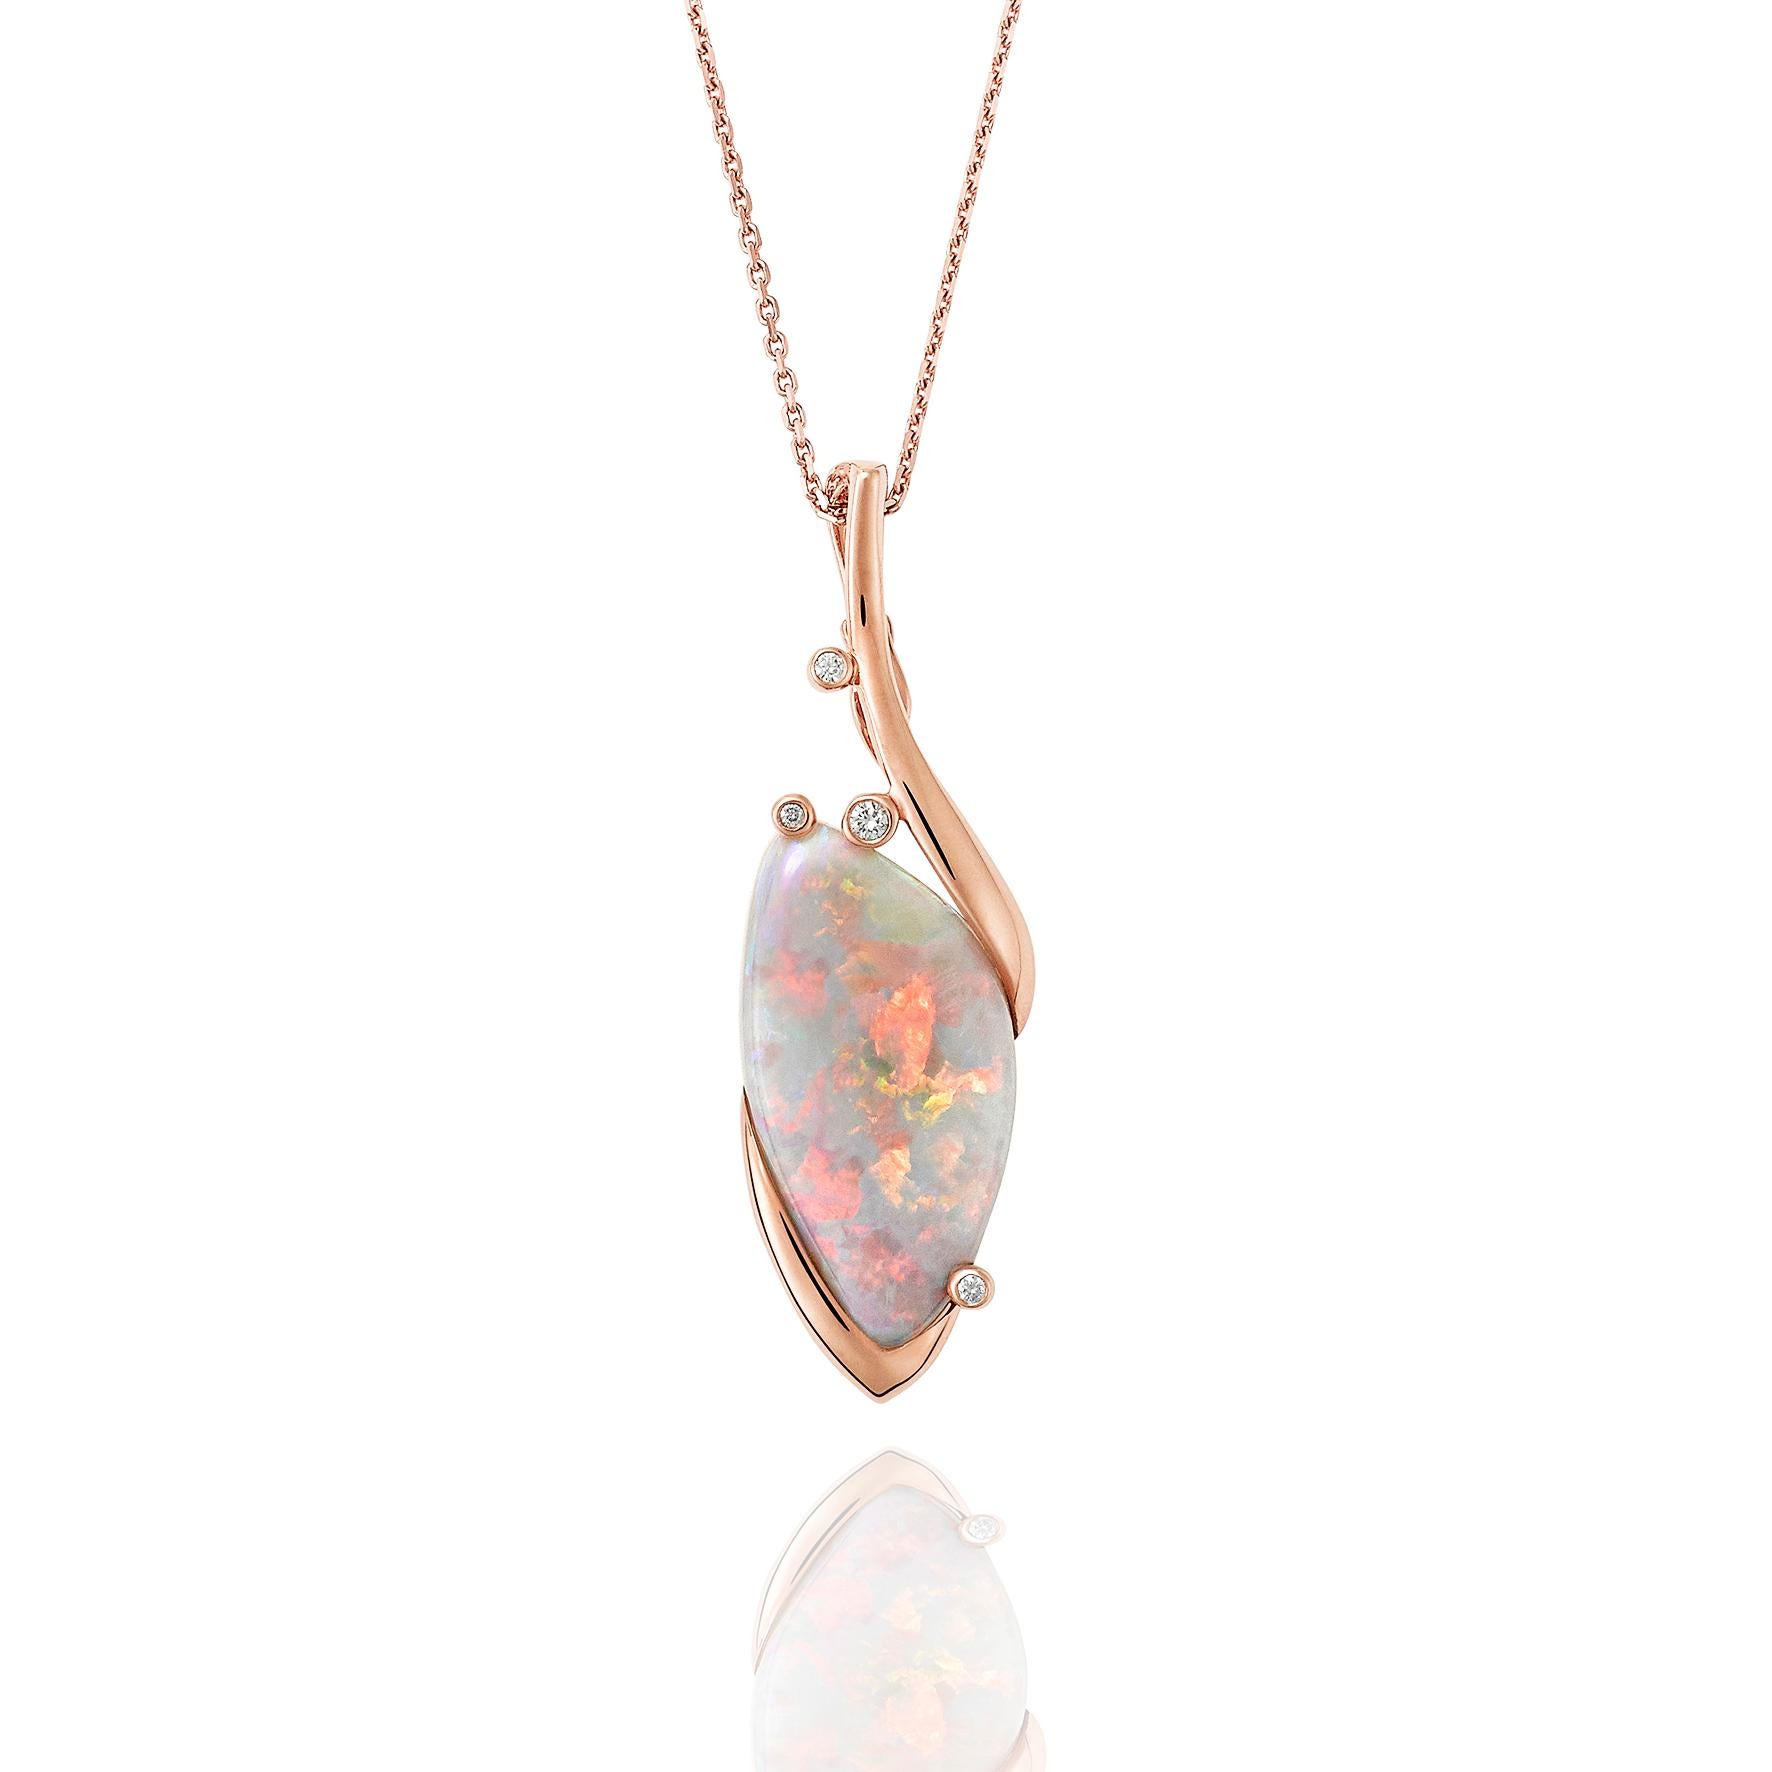 Giulians Contemporary 18 karat rose gold Australian black opal and diamond Pendant Necklace.  This pendant features a 13.60ct natural solid light black opal, from Lightning Ridge NSW, with bright pastel pink play-of-color.  The opal is set in 4